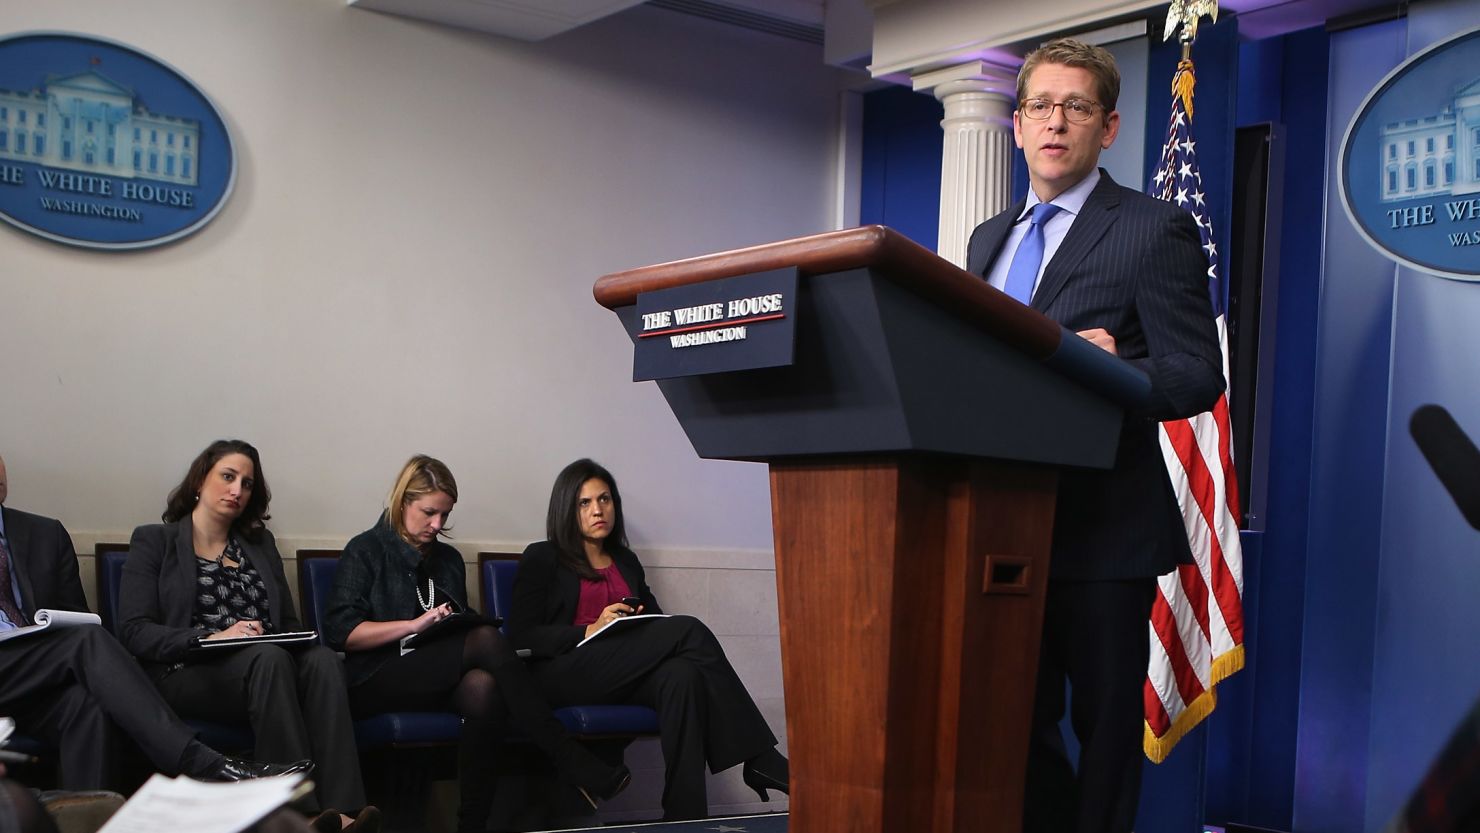 Press secretary Jay Carney tells reporters the White House will not negotiate with Congress about raising the debt ceiling.
